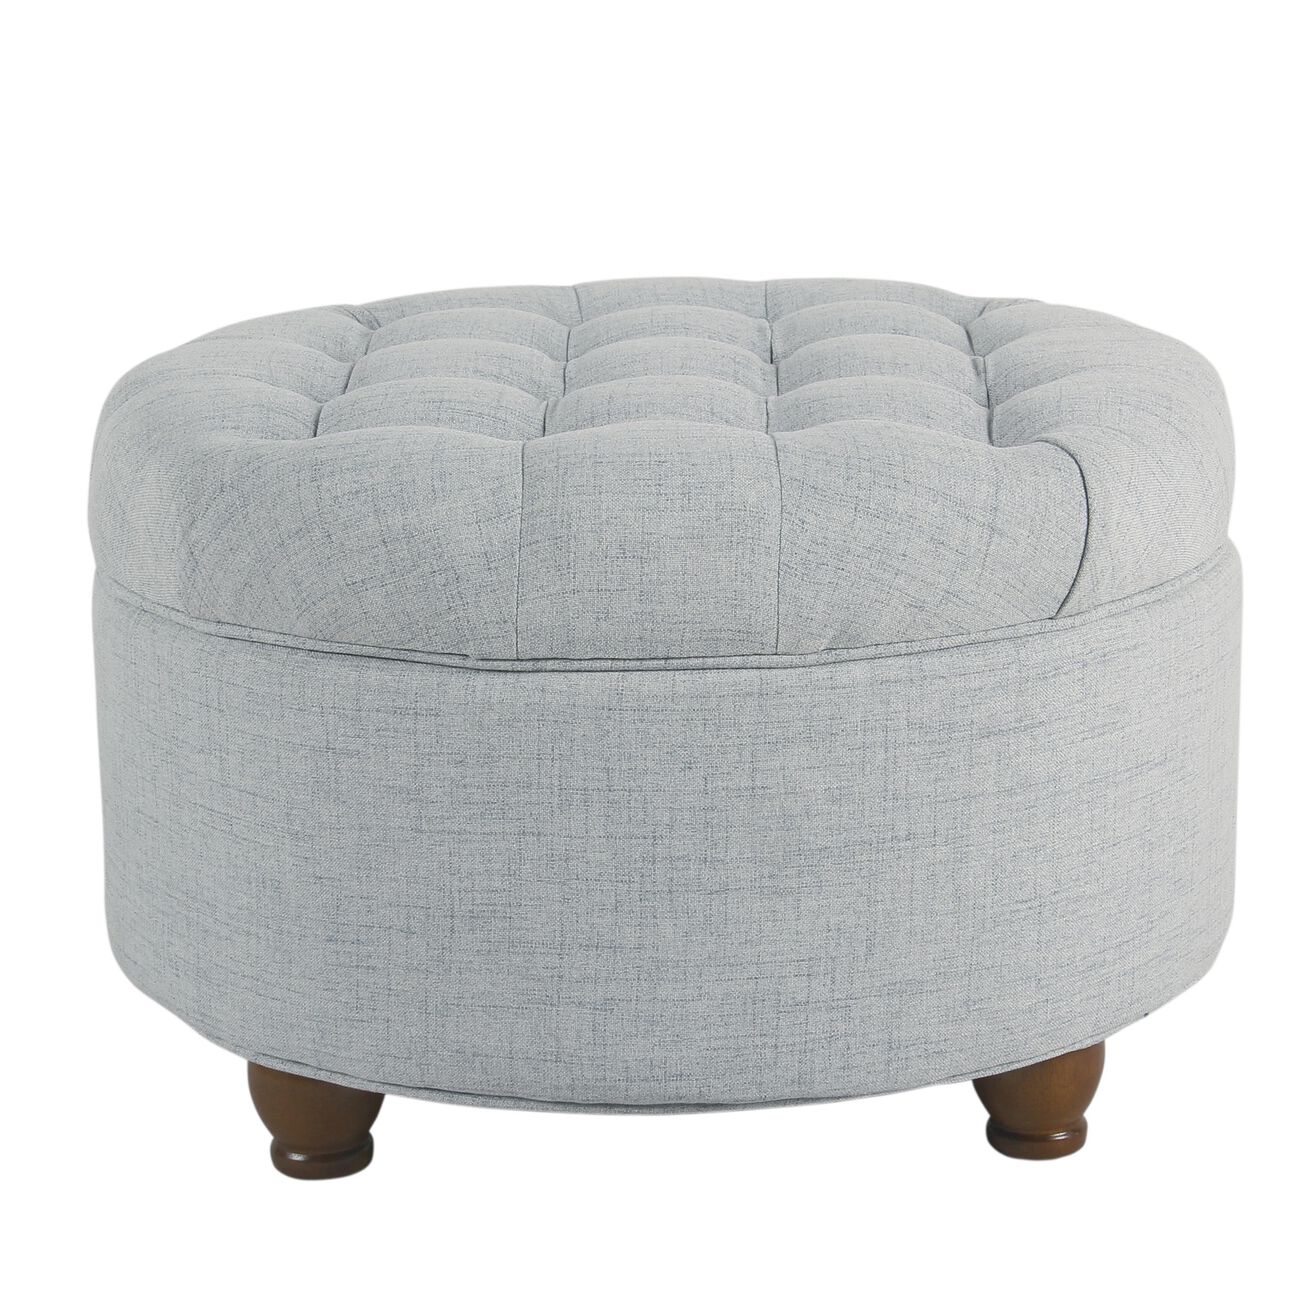 Fabric Upholstered Wooden Ottoman with Tufted Lift Off Lid Storage, Light Blue